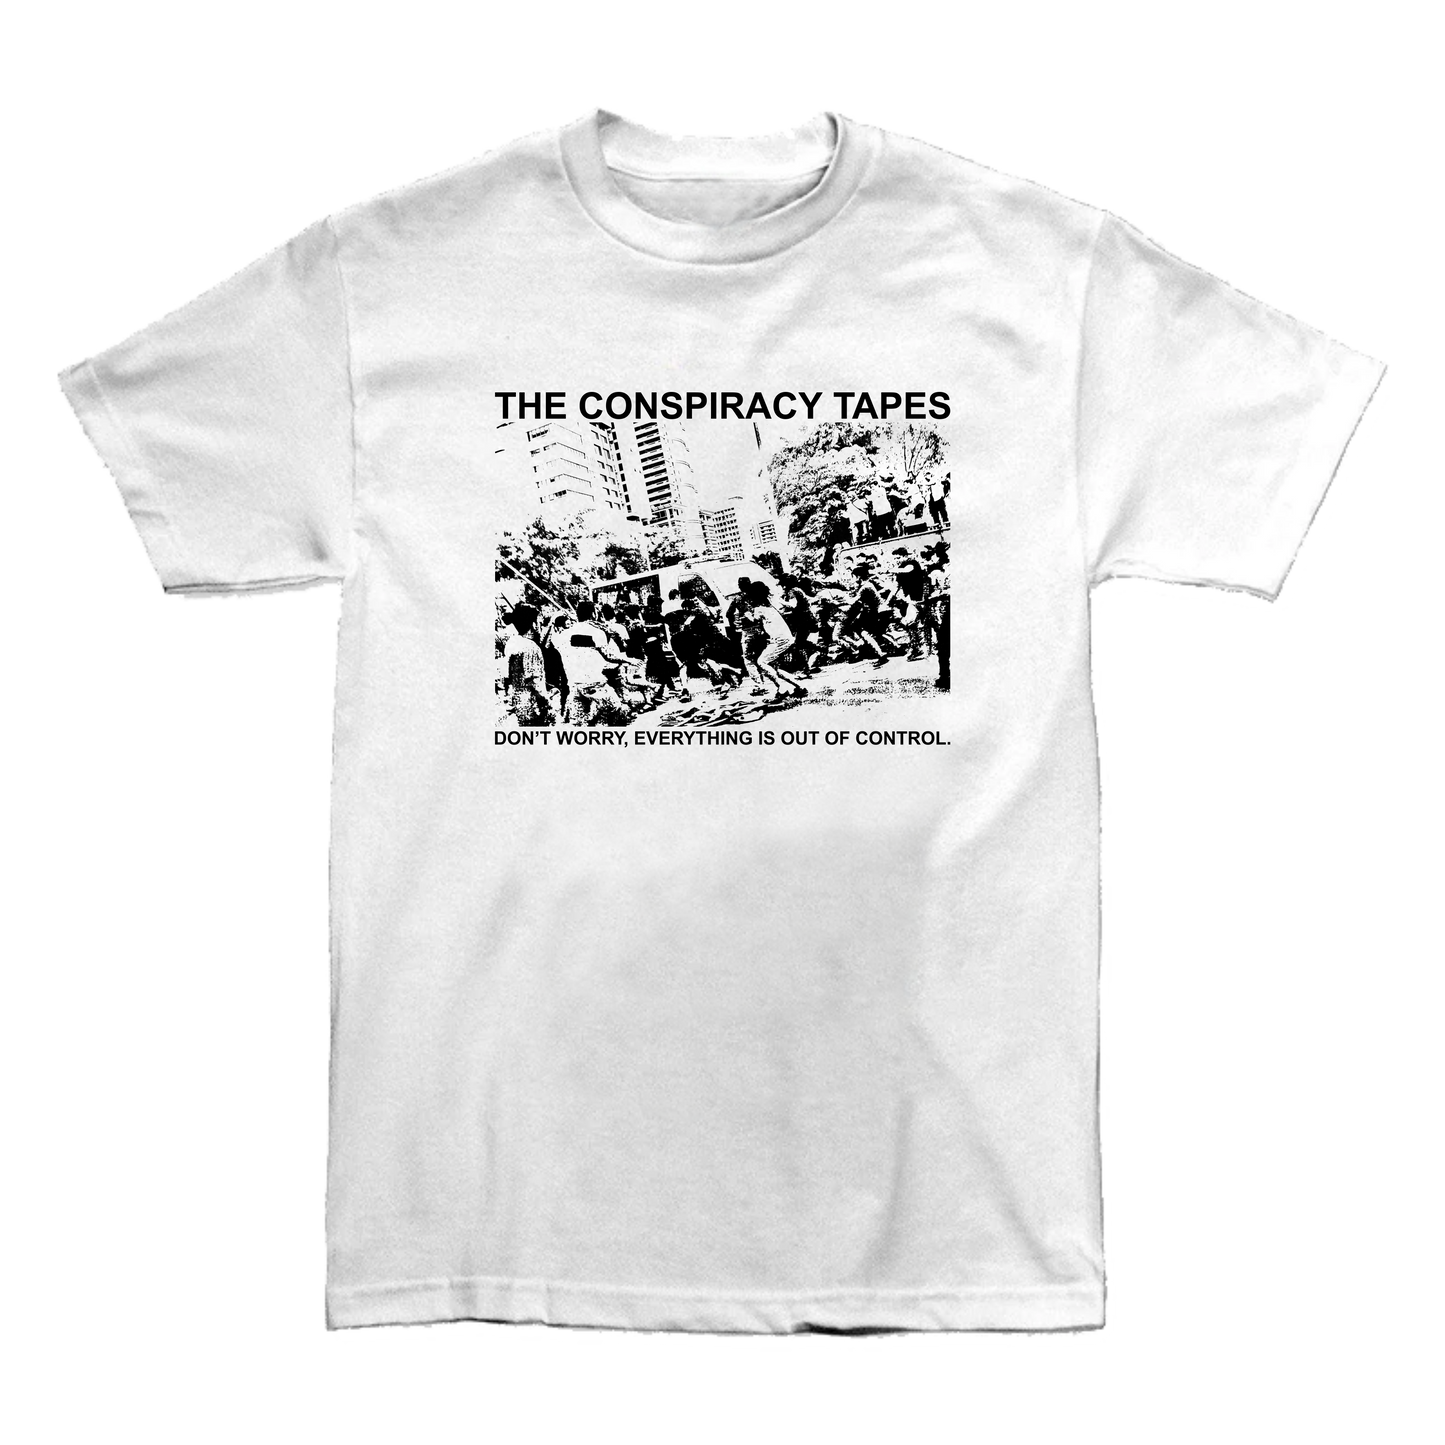 THE CONSPIRACY TAPES SHIRT